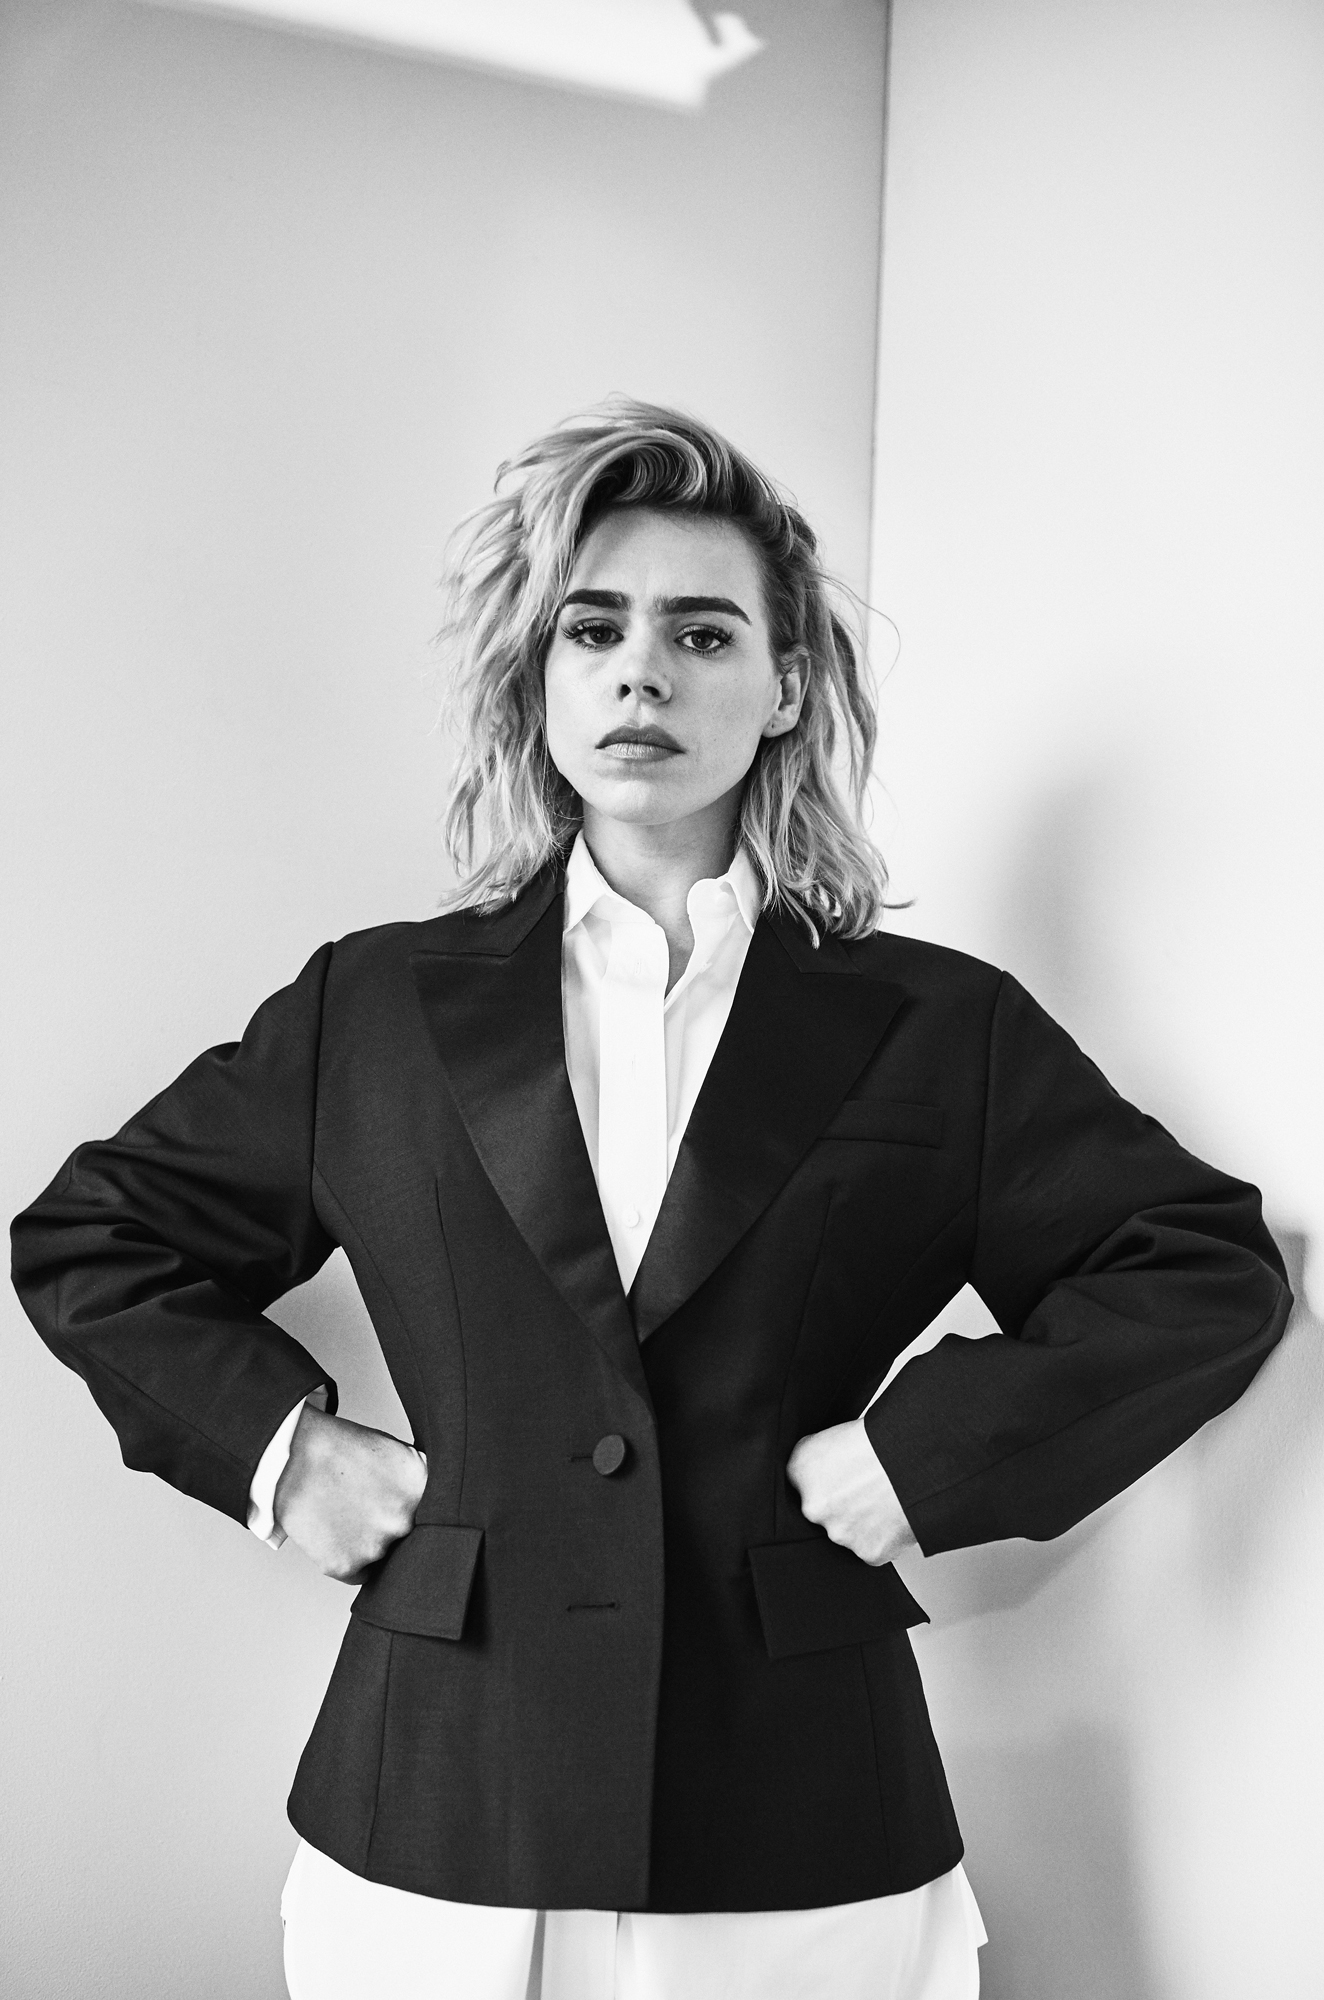   The Sunday Times Style Magazine - Billie Piper  